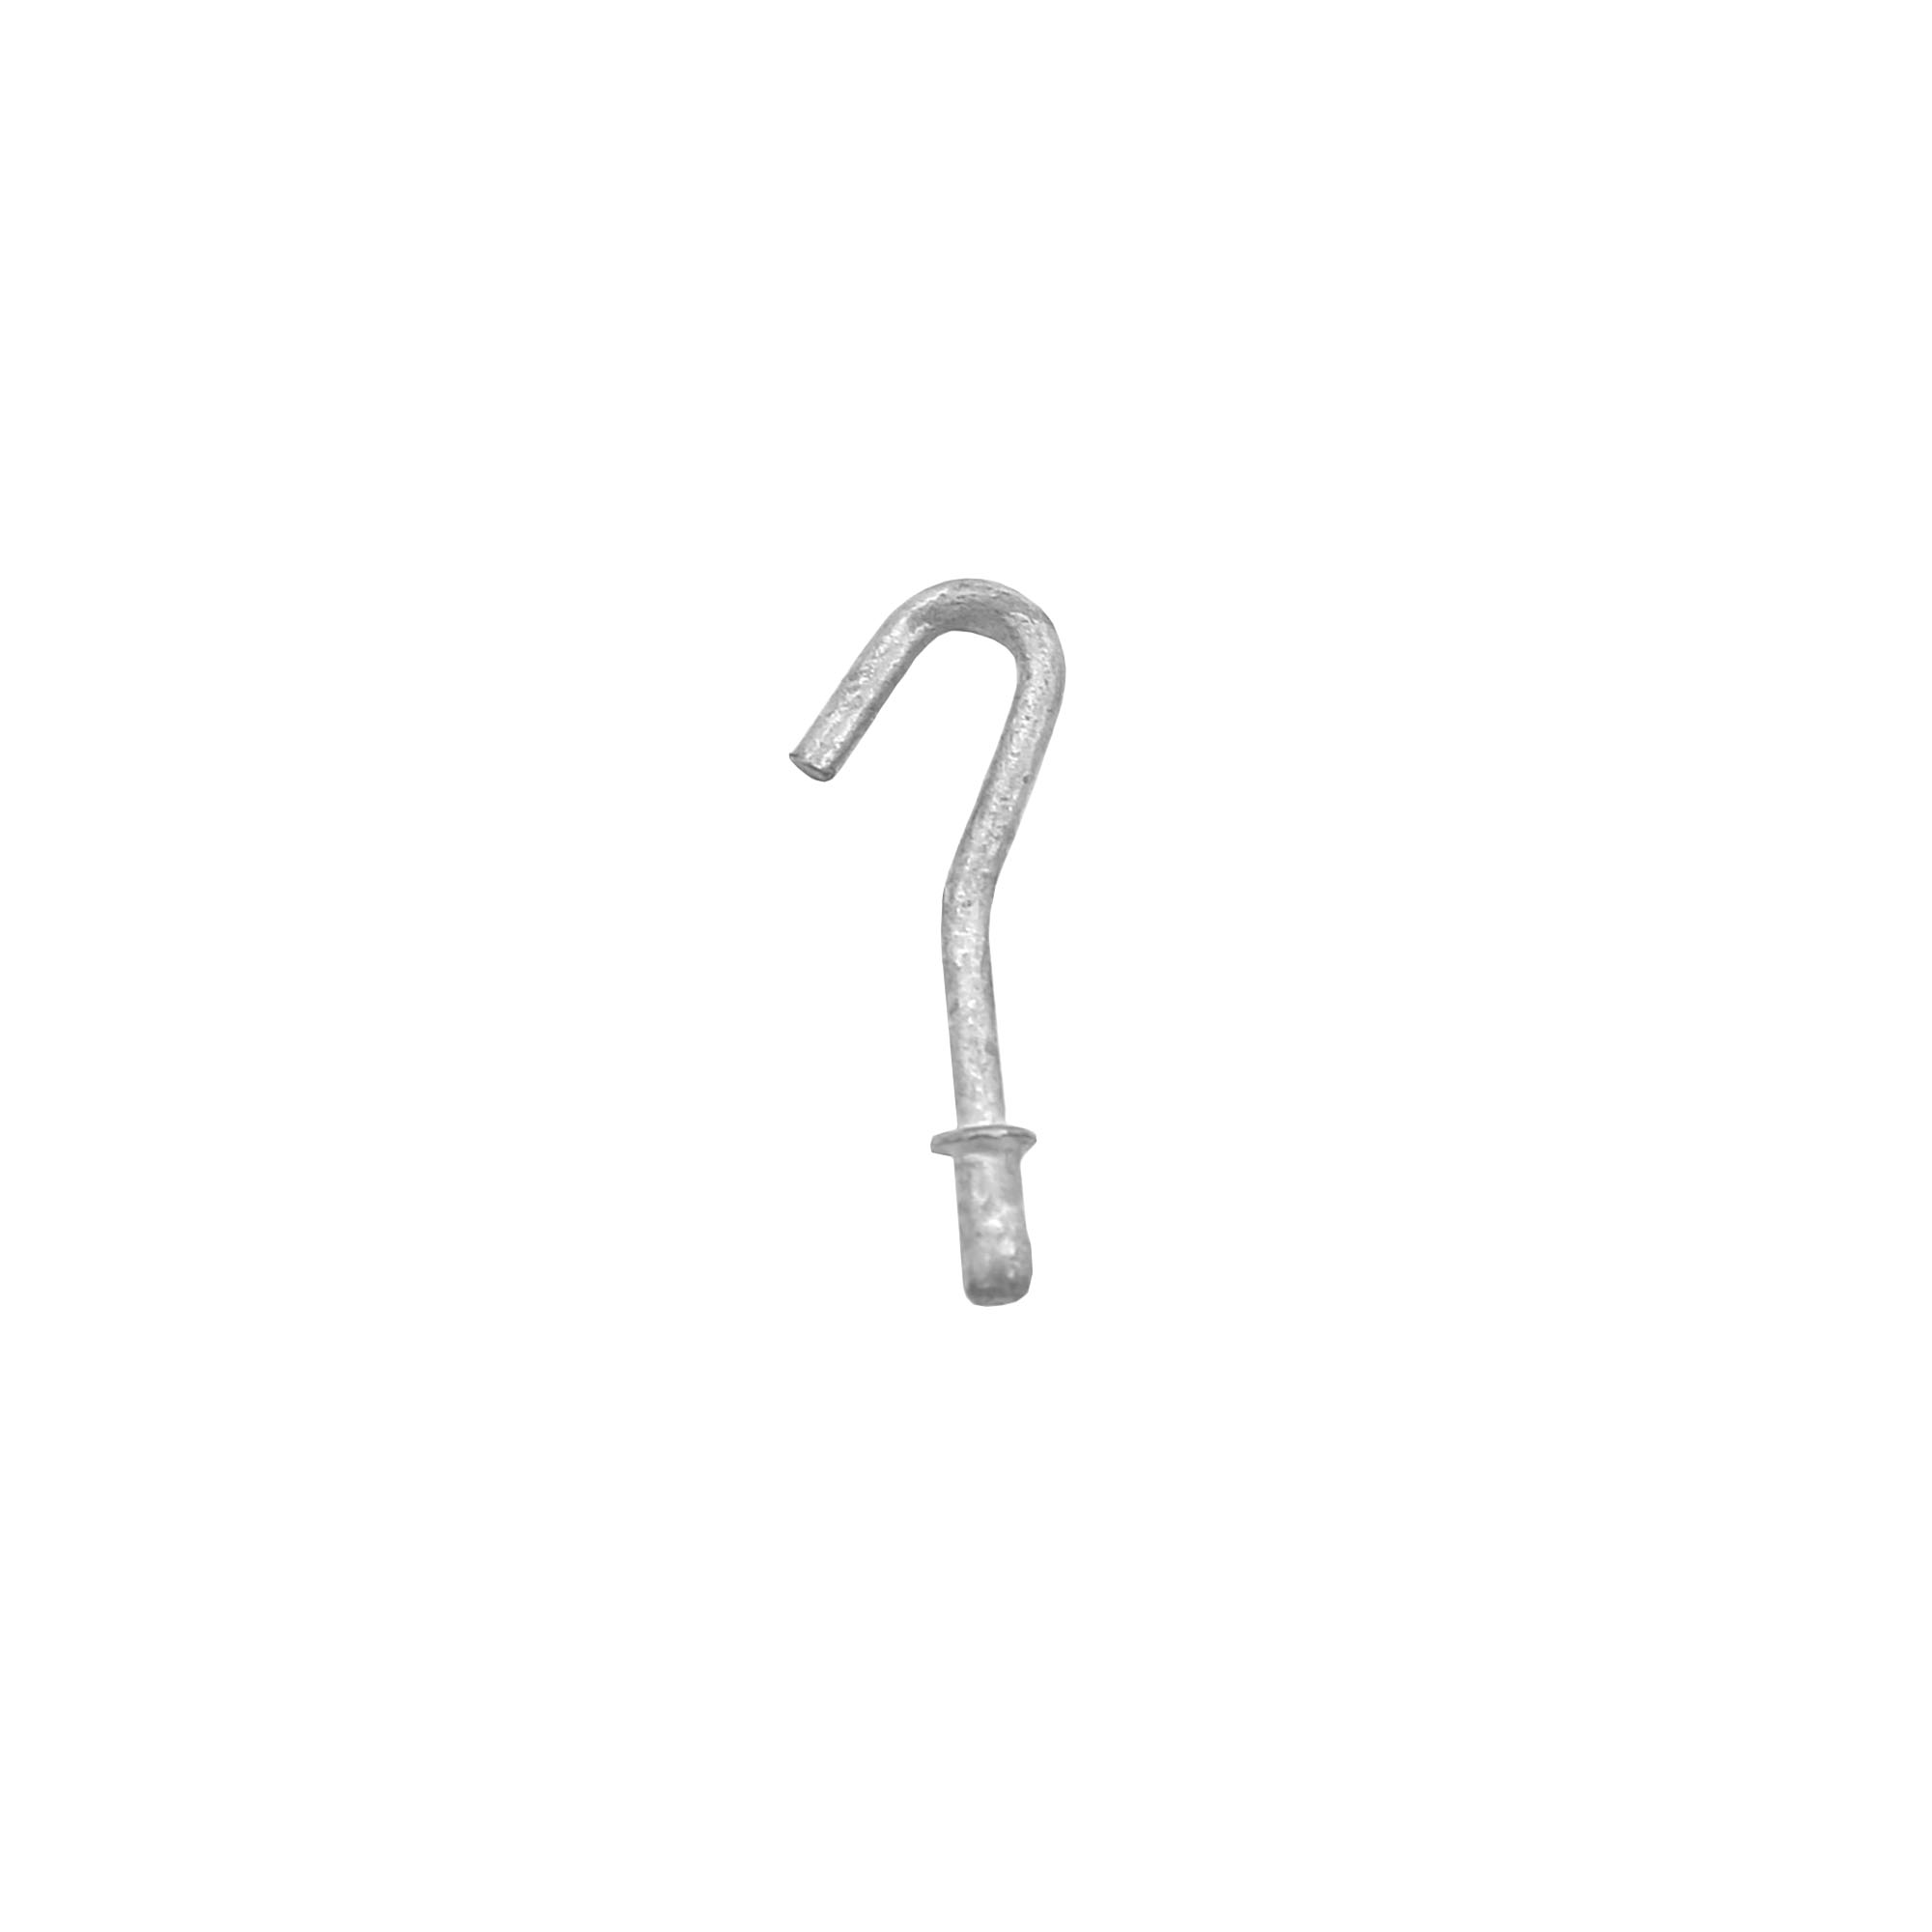 Parts Washer Replacement Parts, Parts & Accessories, Hook Type Fusible Link for Parts Washers, P624 Hook Link, American Hawk Industrial, Dee-Blast